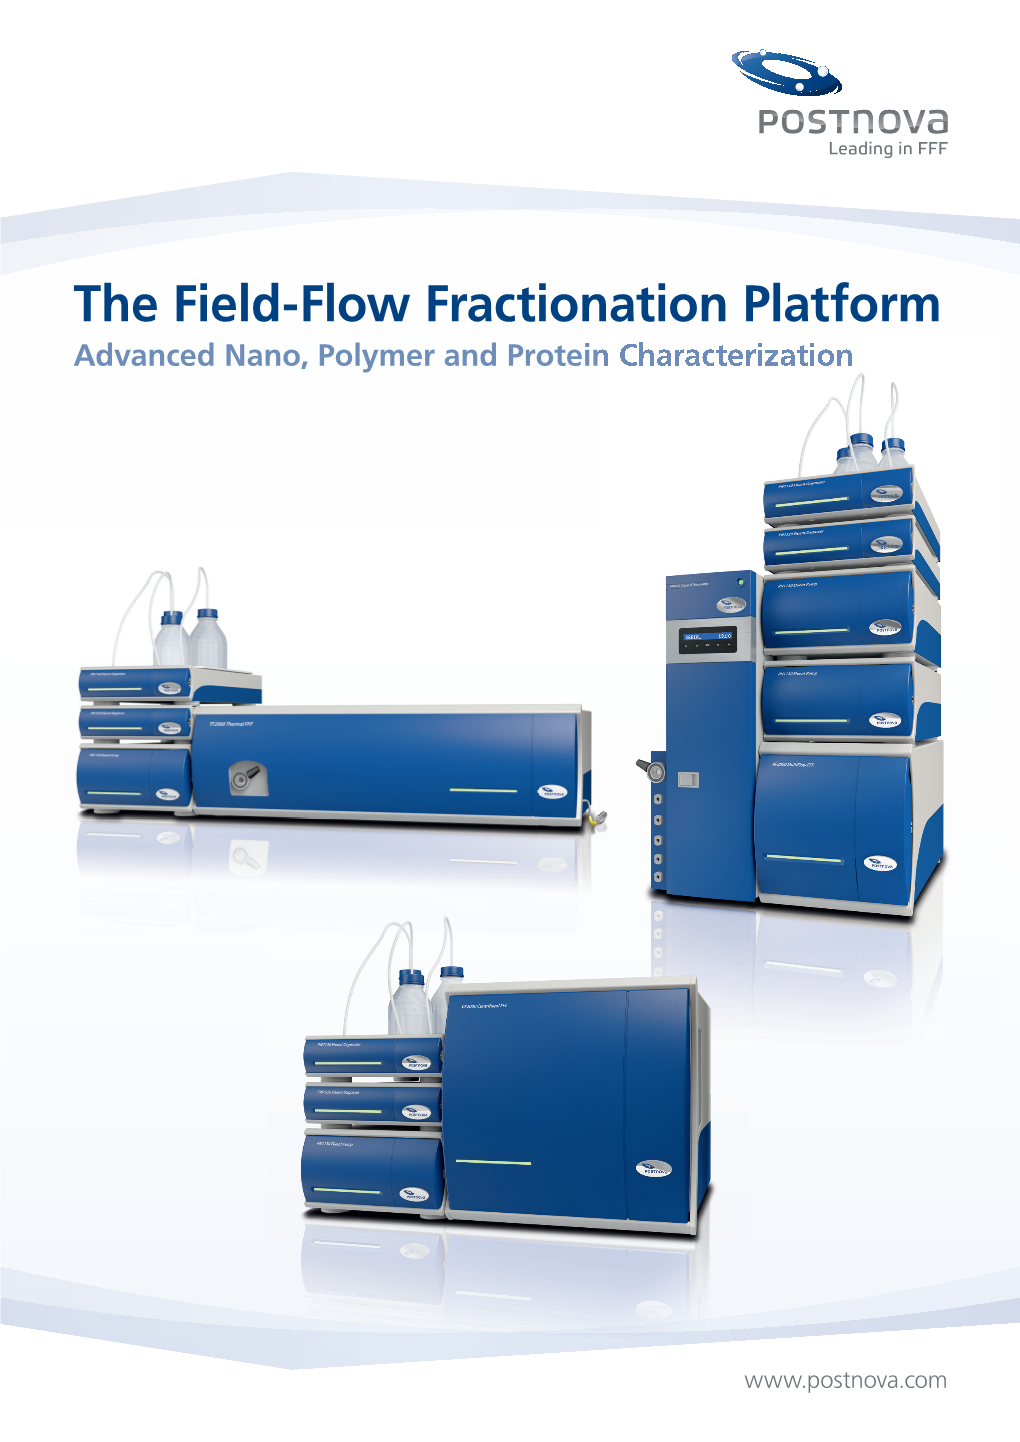 The Field-Flow Fractionation Platform Advanced Nano, Polymer and Protein Characterization